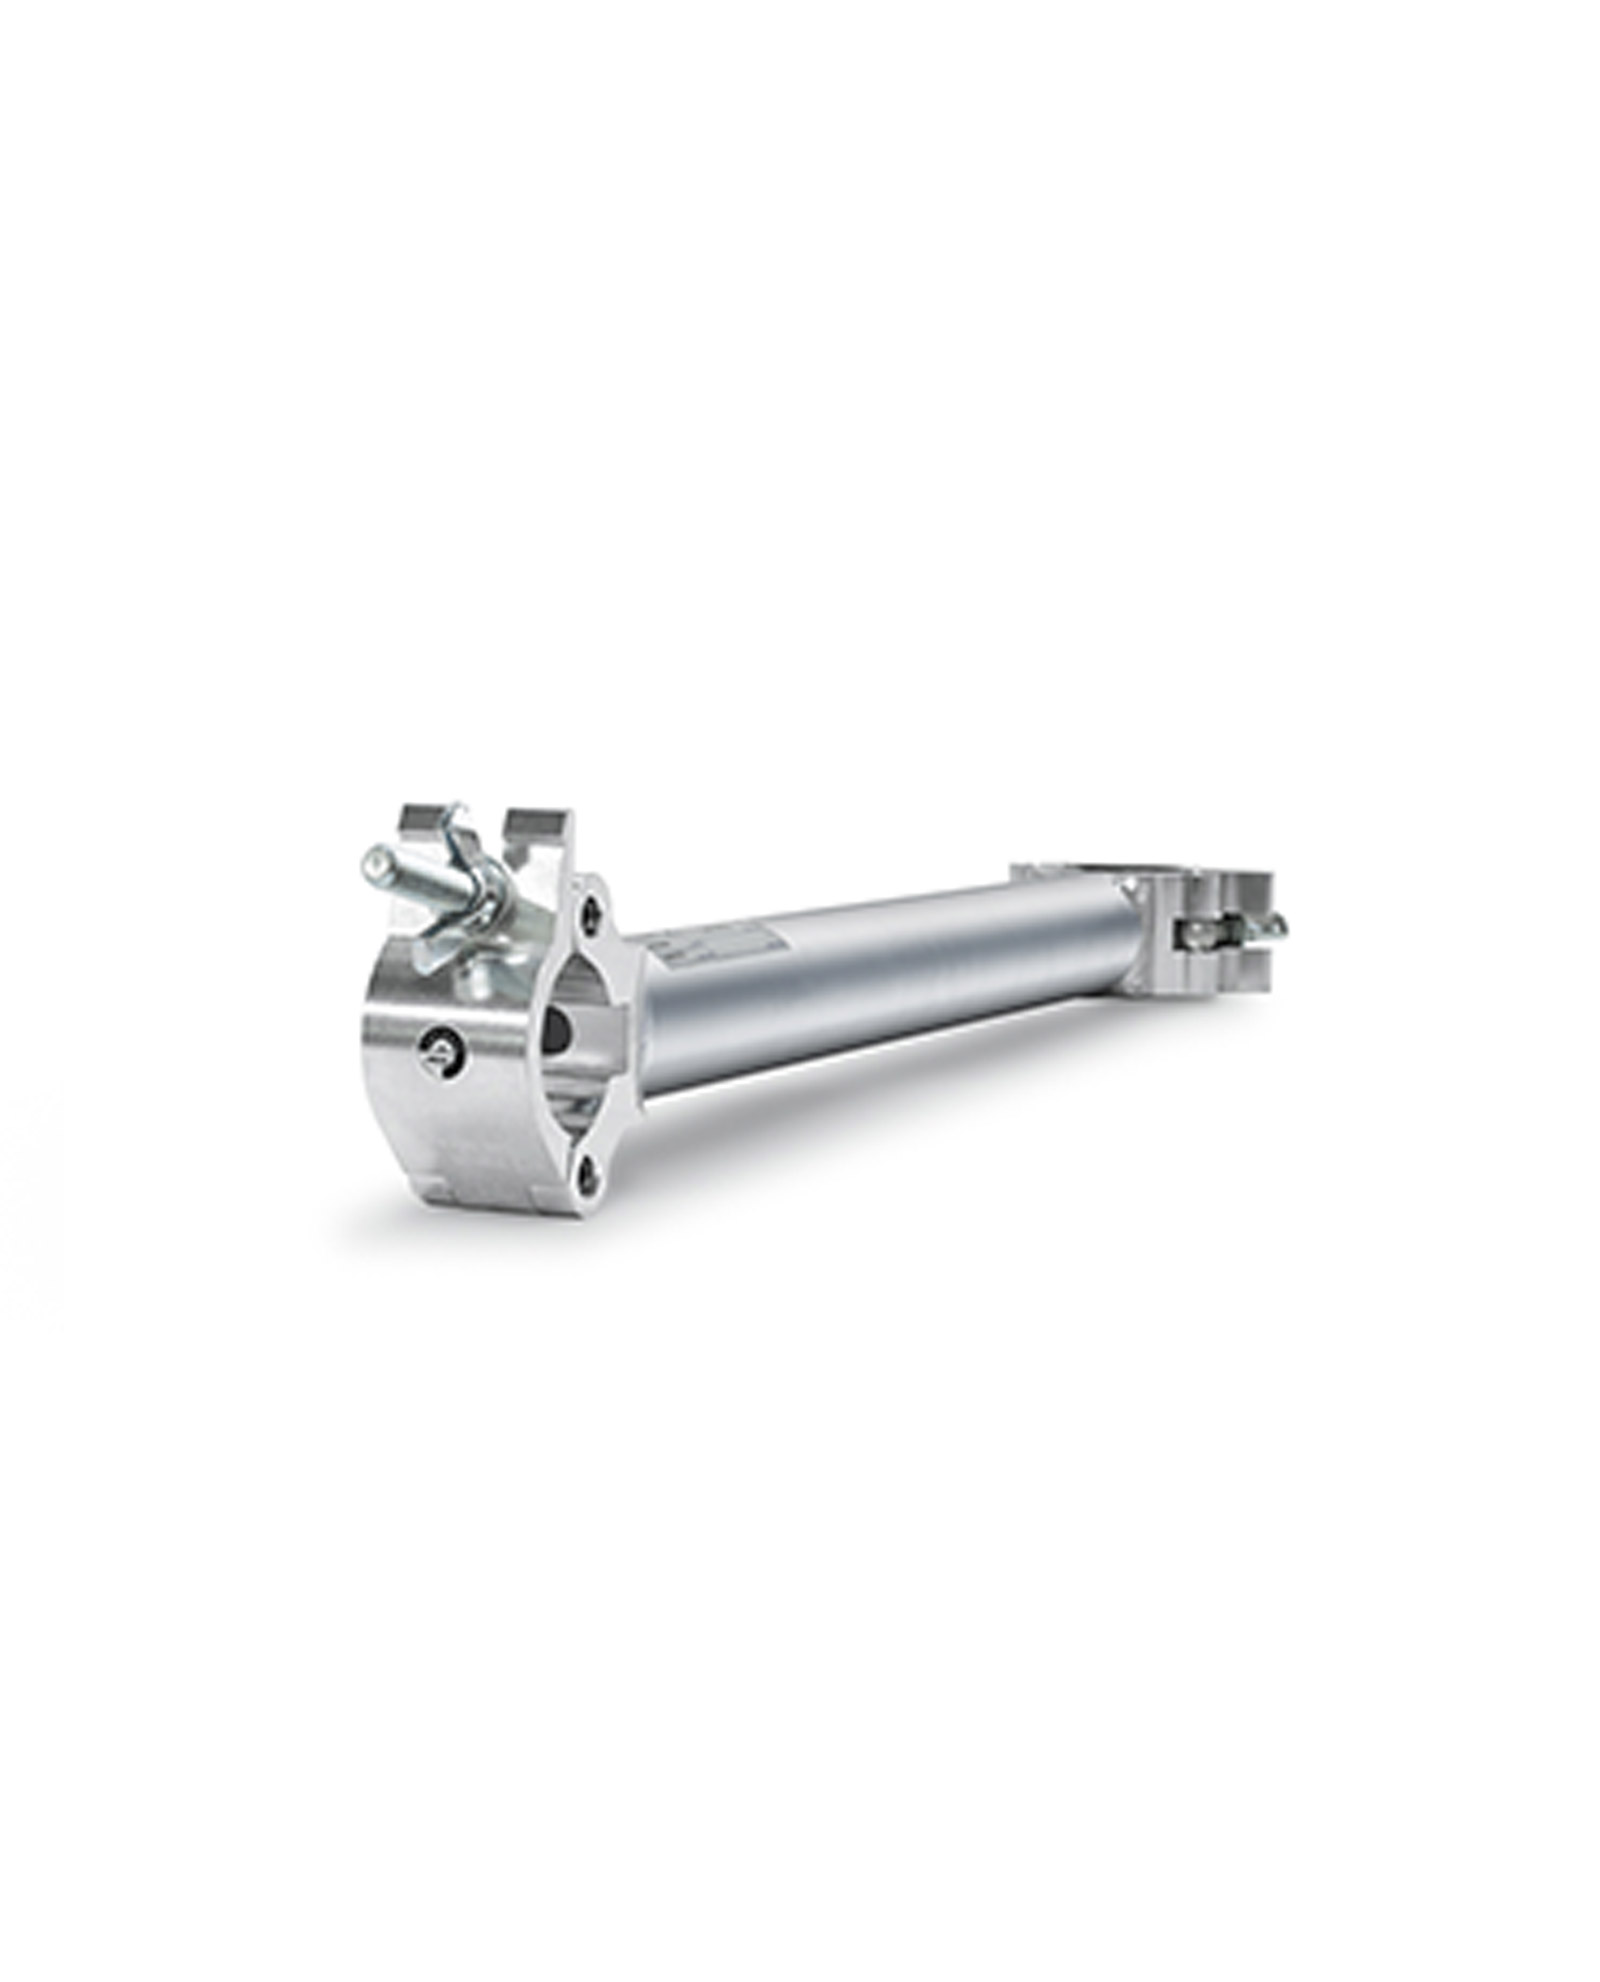 Milos Cell 210 250mm Extended Parallel Coupler 90°, 48 50mm 500kg Rated Aluminium